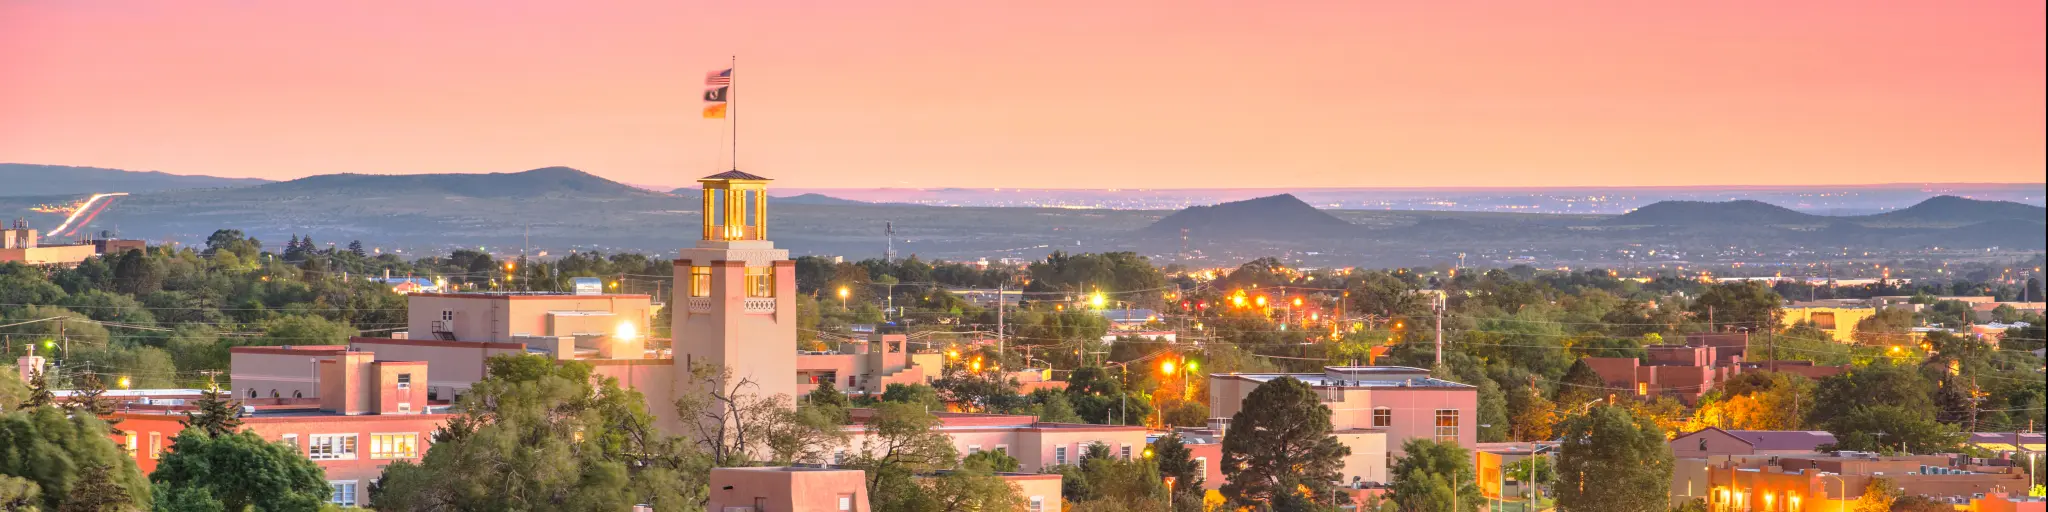 Skyline of downtown Santa Fe, NM at sunset